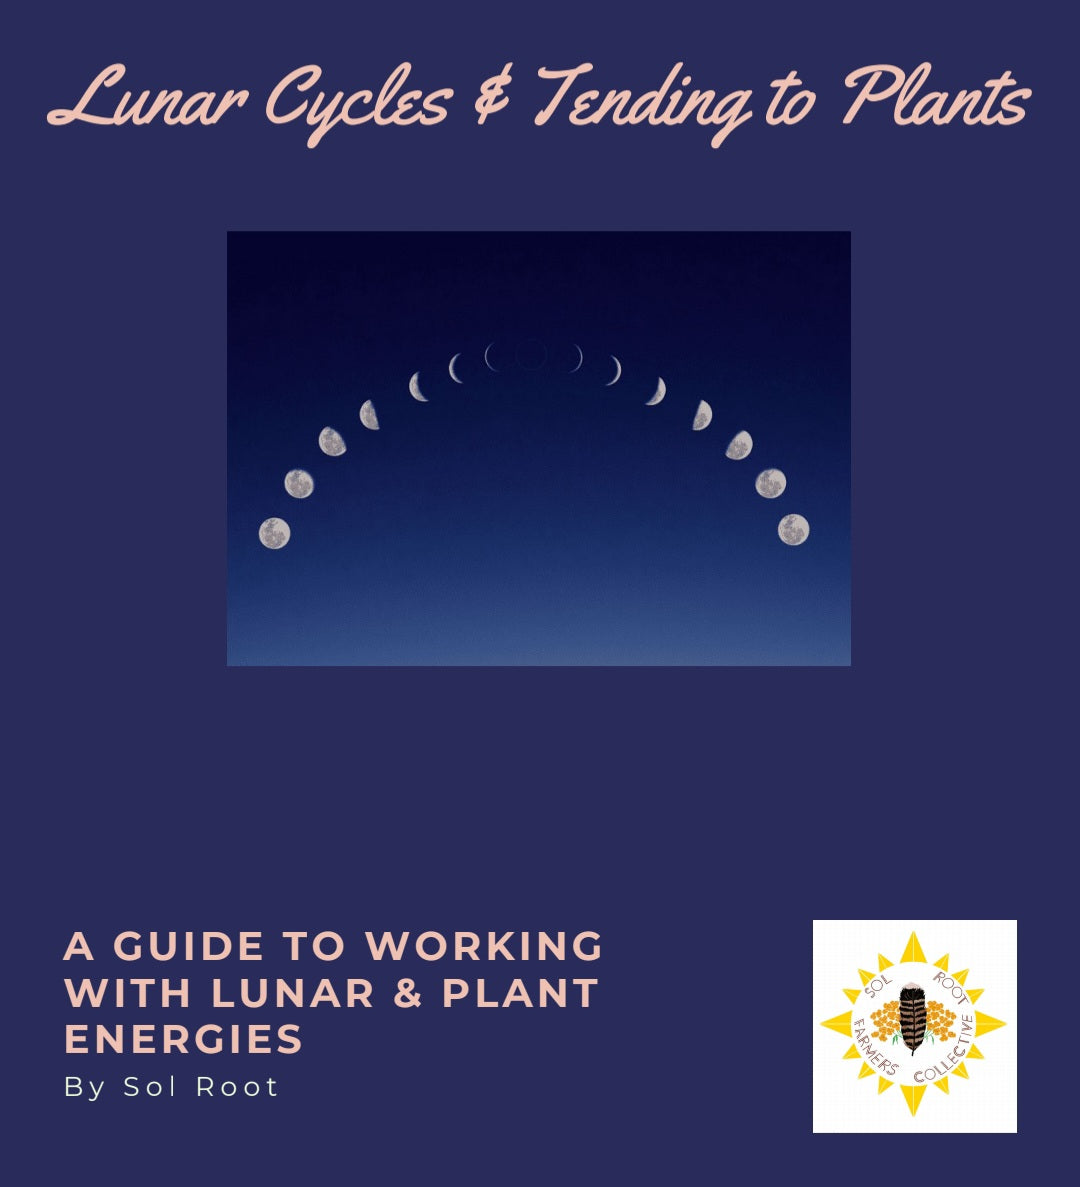 Lunar Cycles & Tending to Plants